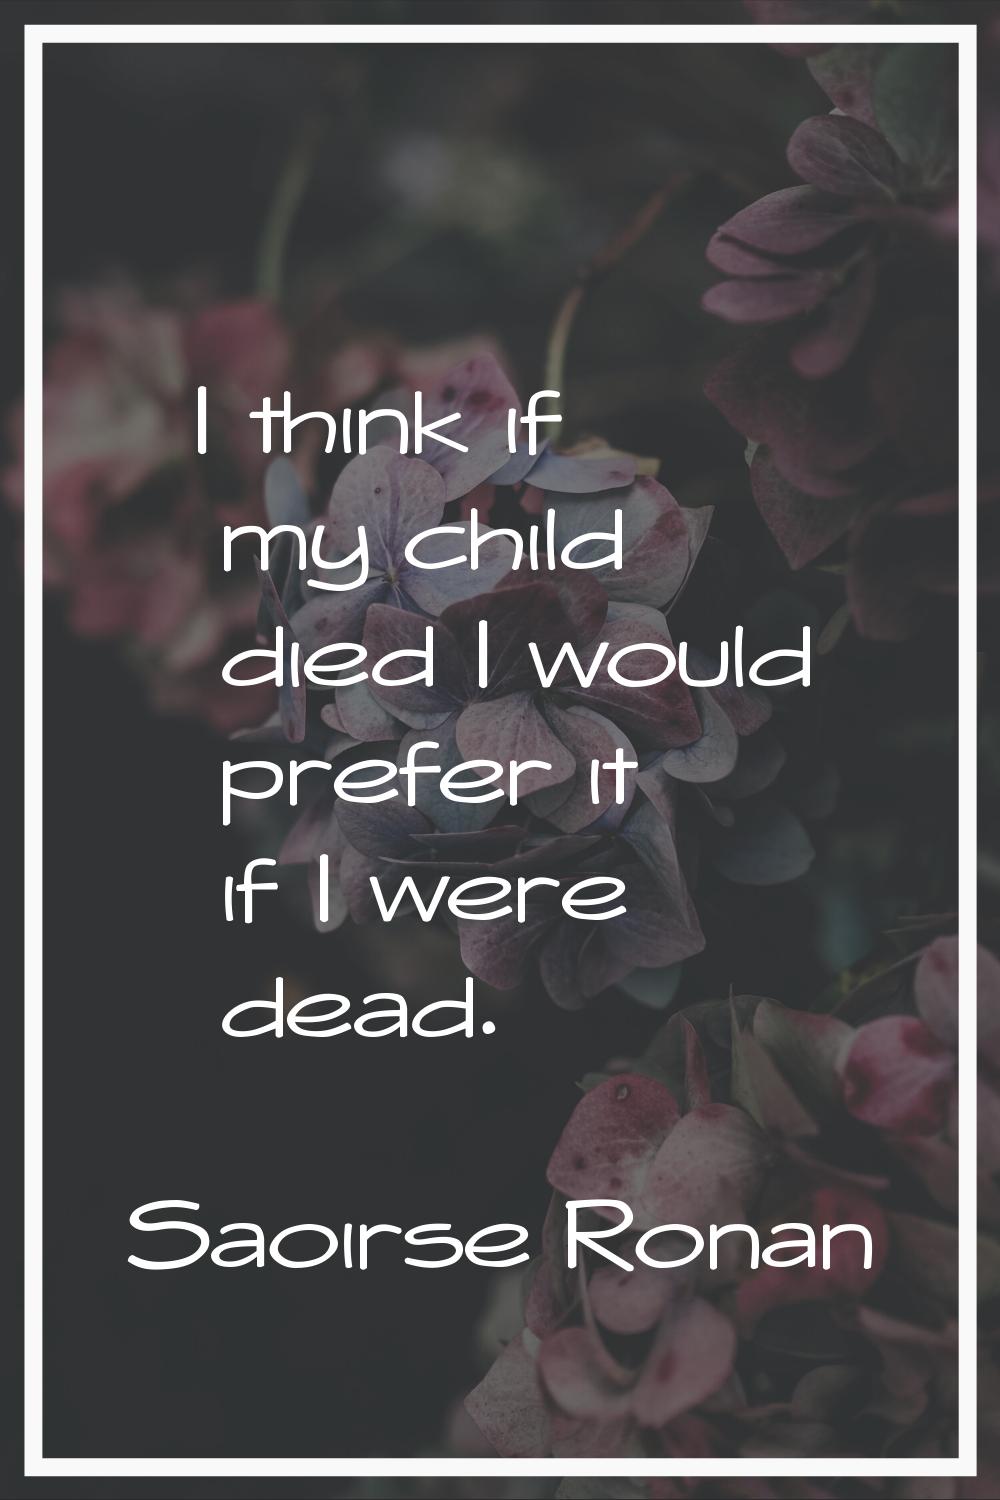 I think if my child died I would prefer it if I were dead.